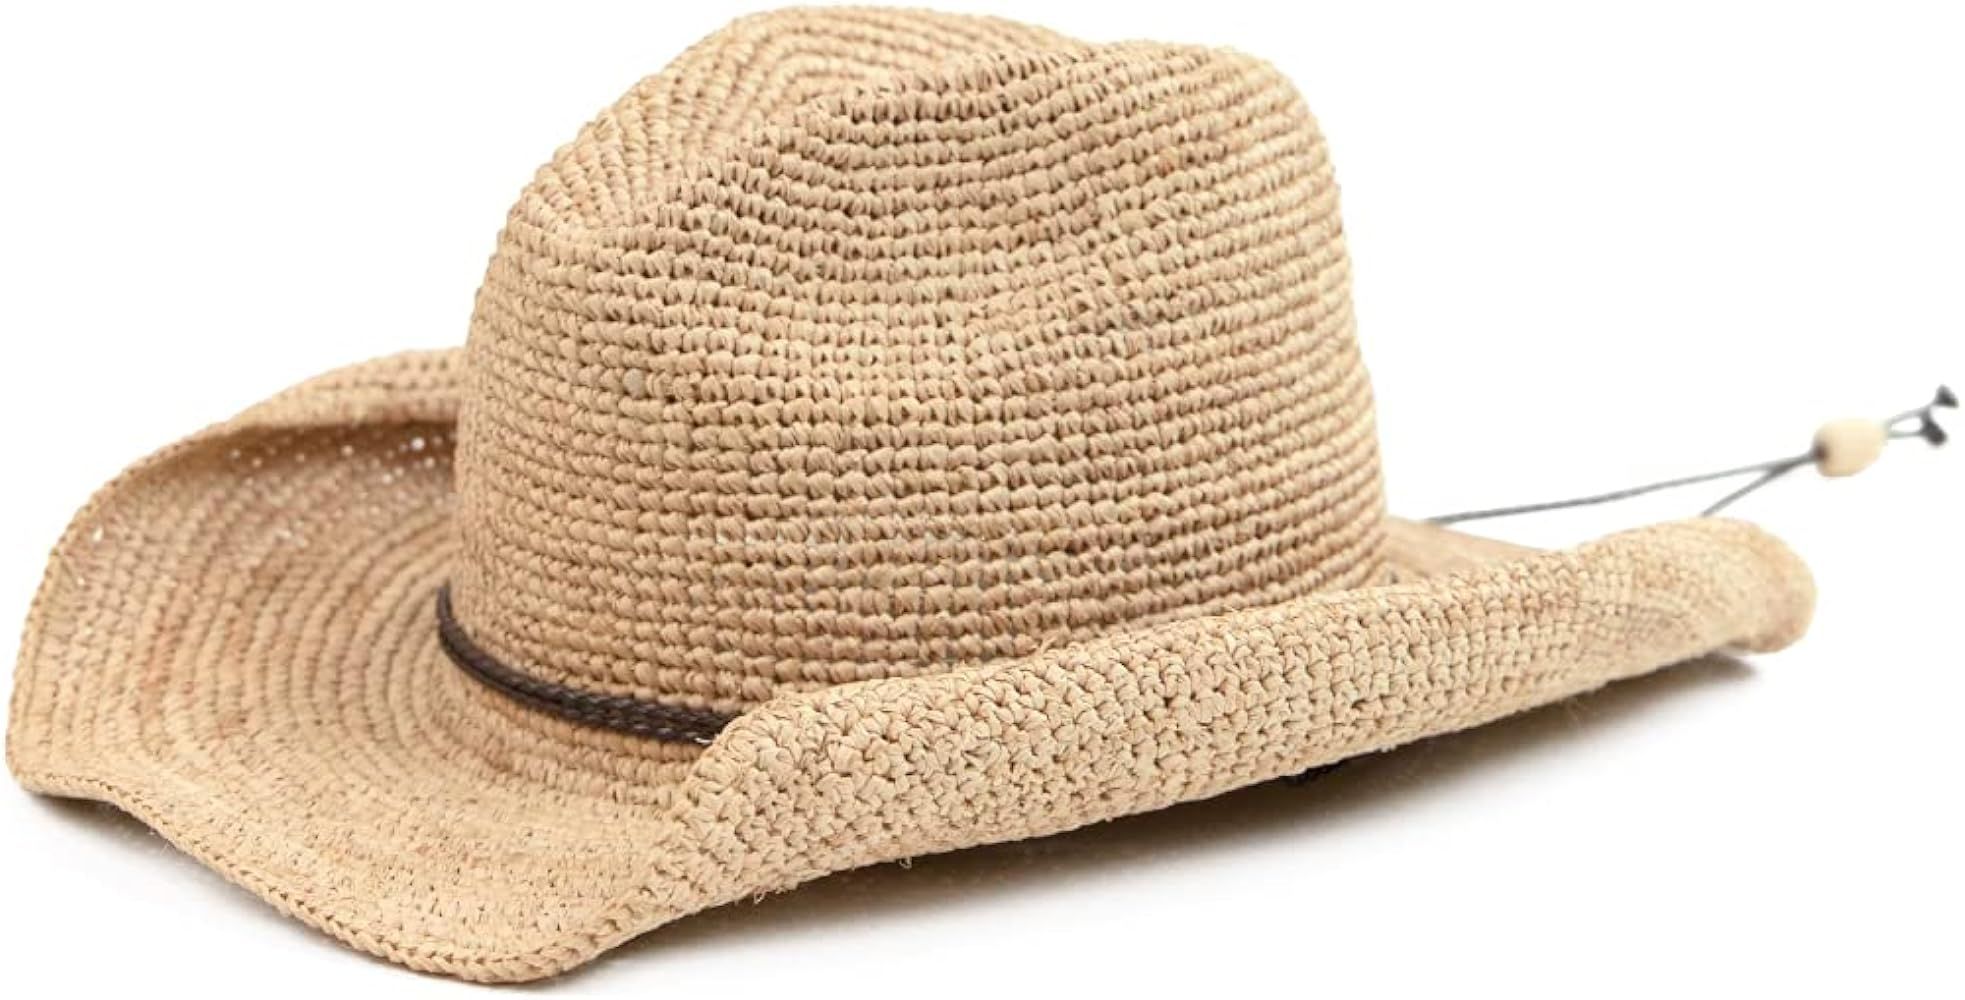 San Diego Hat Company Women's Crocheted Raffia Cowboy Hat,Natural,One Size at Amazon Women’s Cl... | Amazon (US)